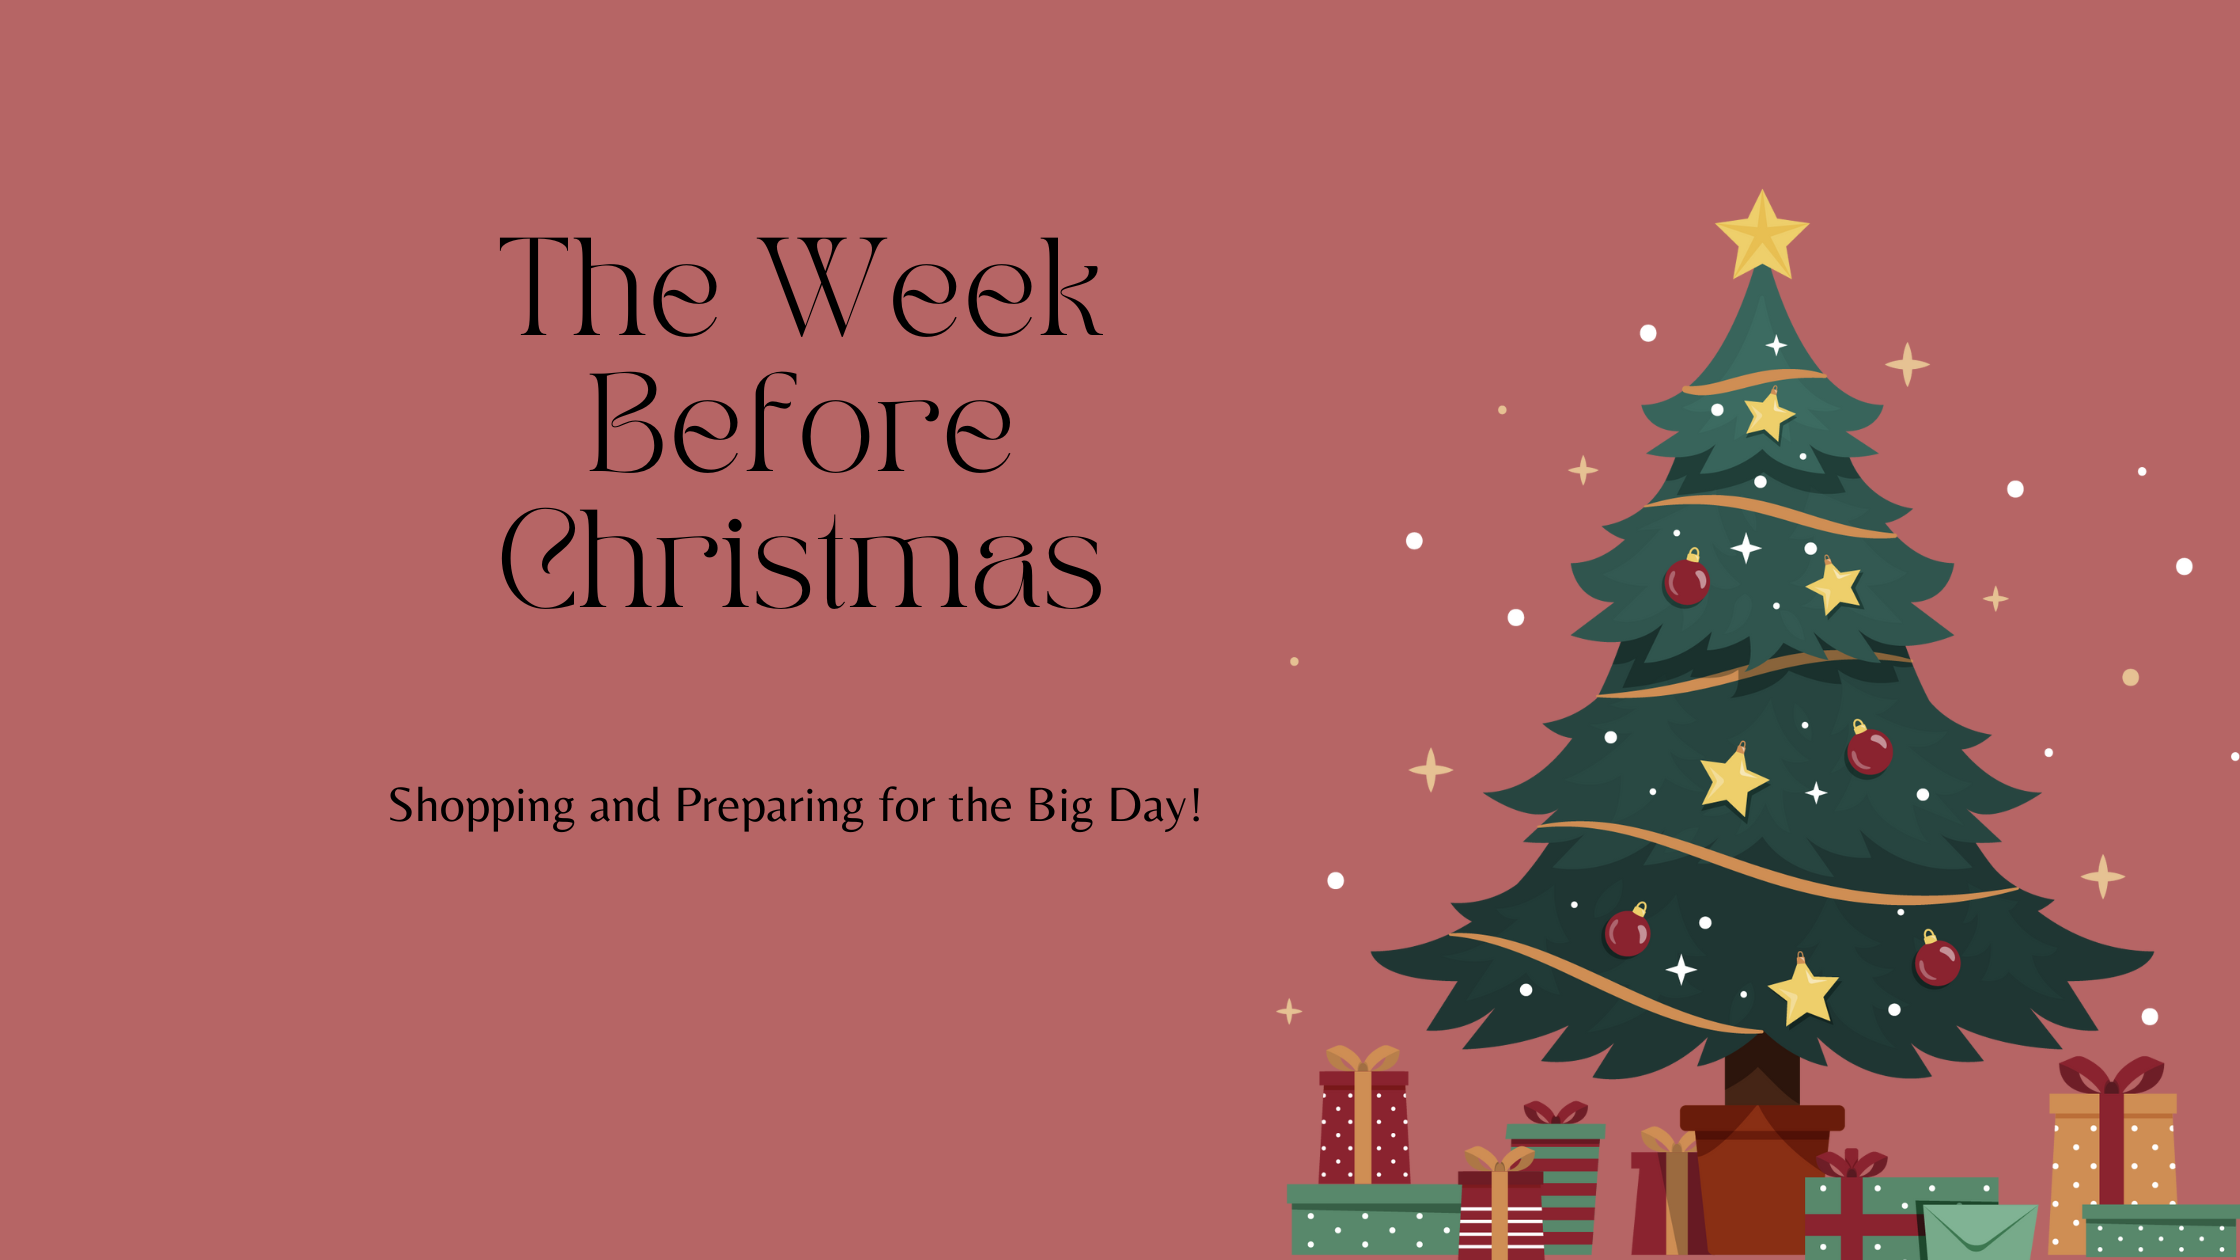 The Week Before Christmas! Preparing for the Big Day